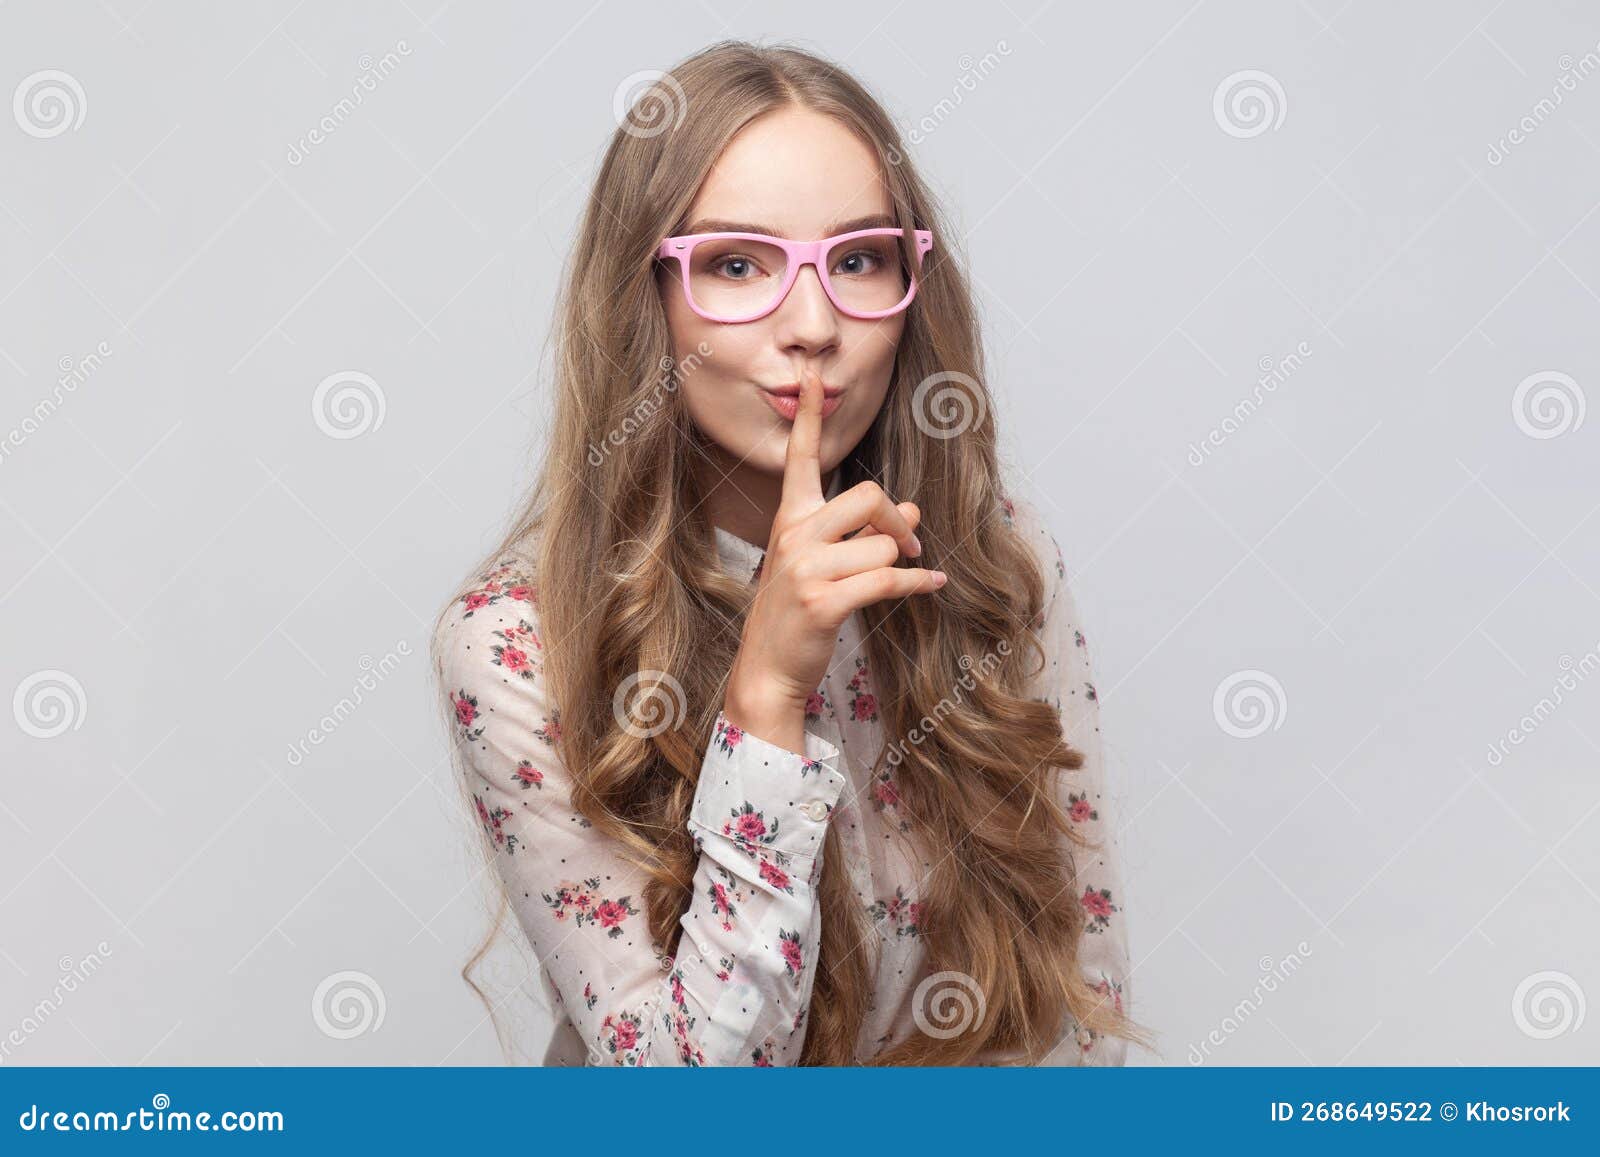 Woman Showing Shh Gesture Holding Finger Near Lips With Naughty Smile On Face Making Surprise